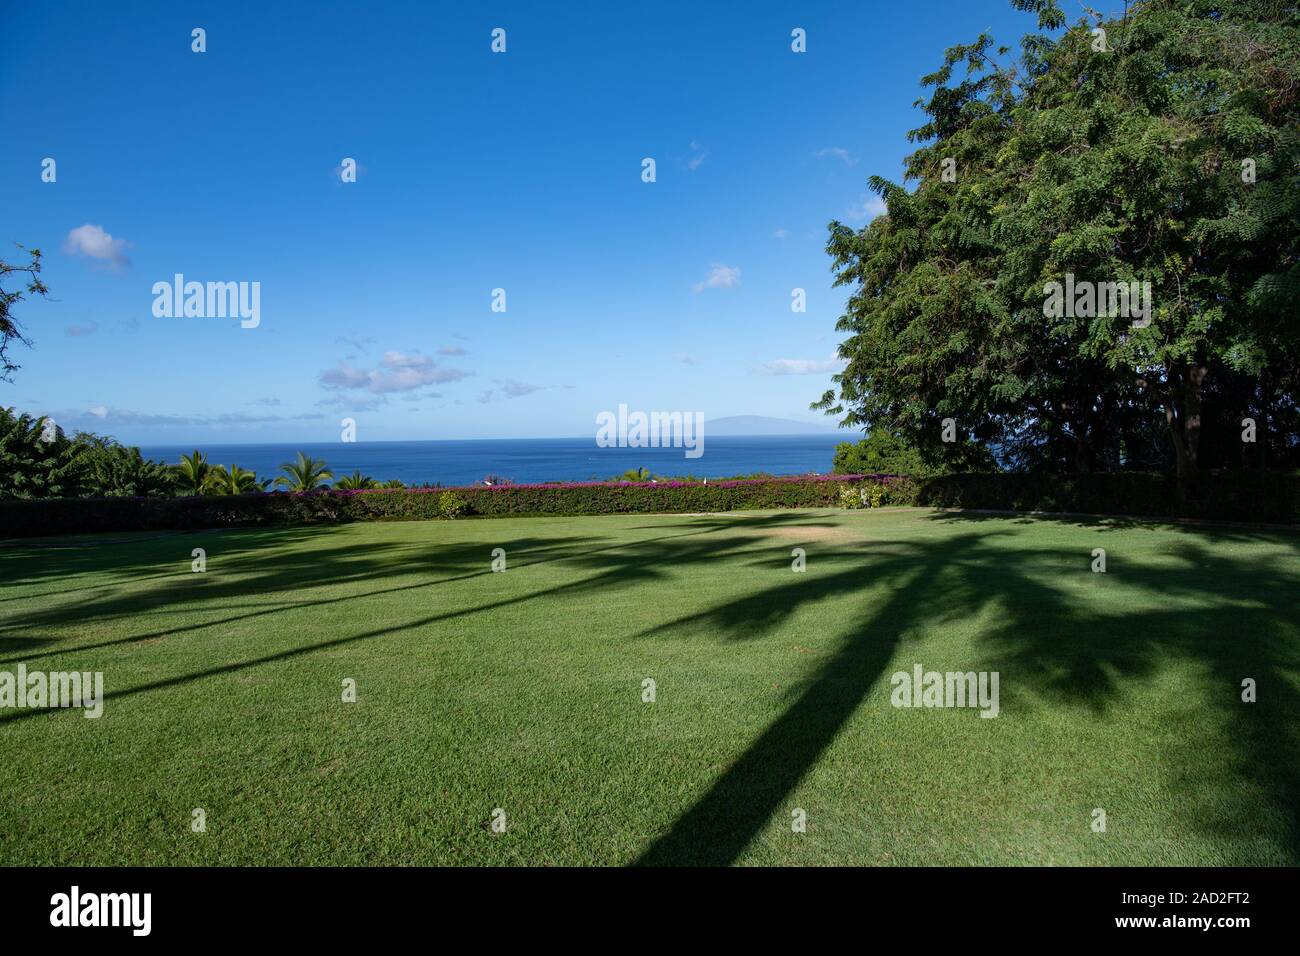 looking out to sea with blue skies and shadows of palm trees cast on a garden lawn Stock Photo